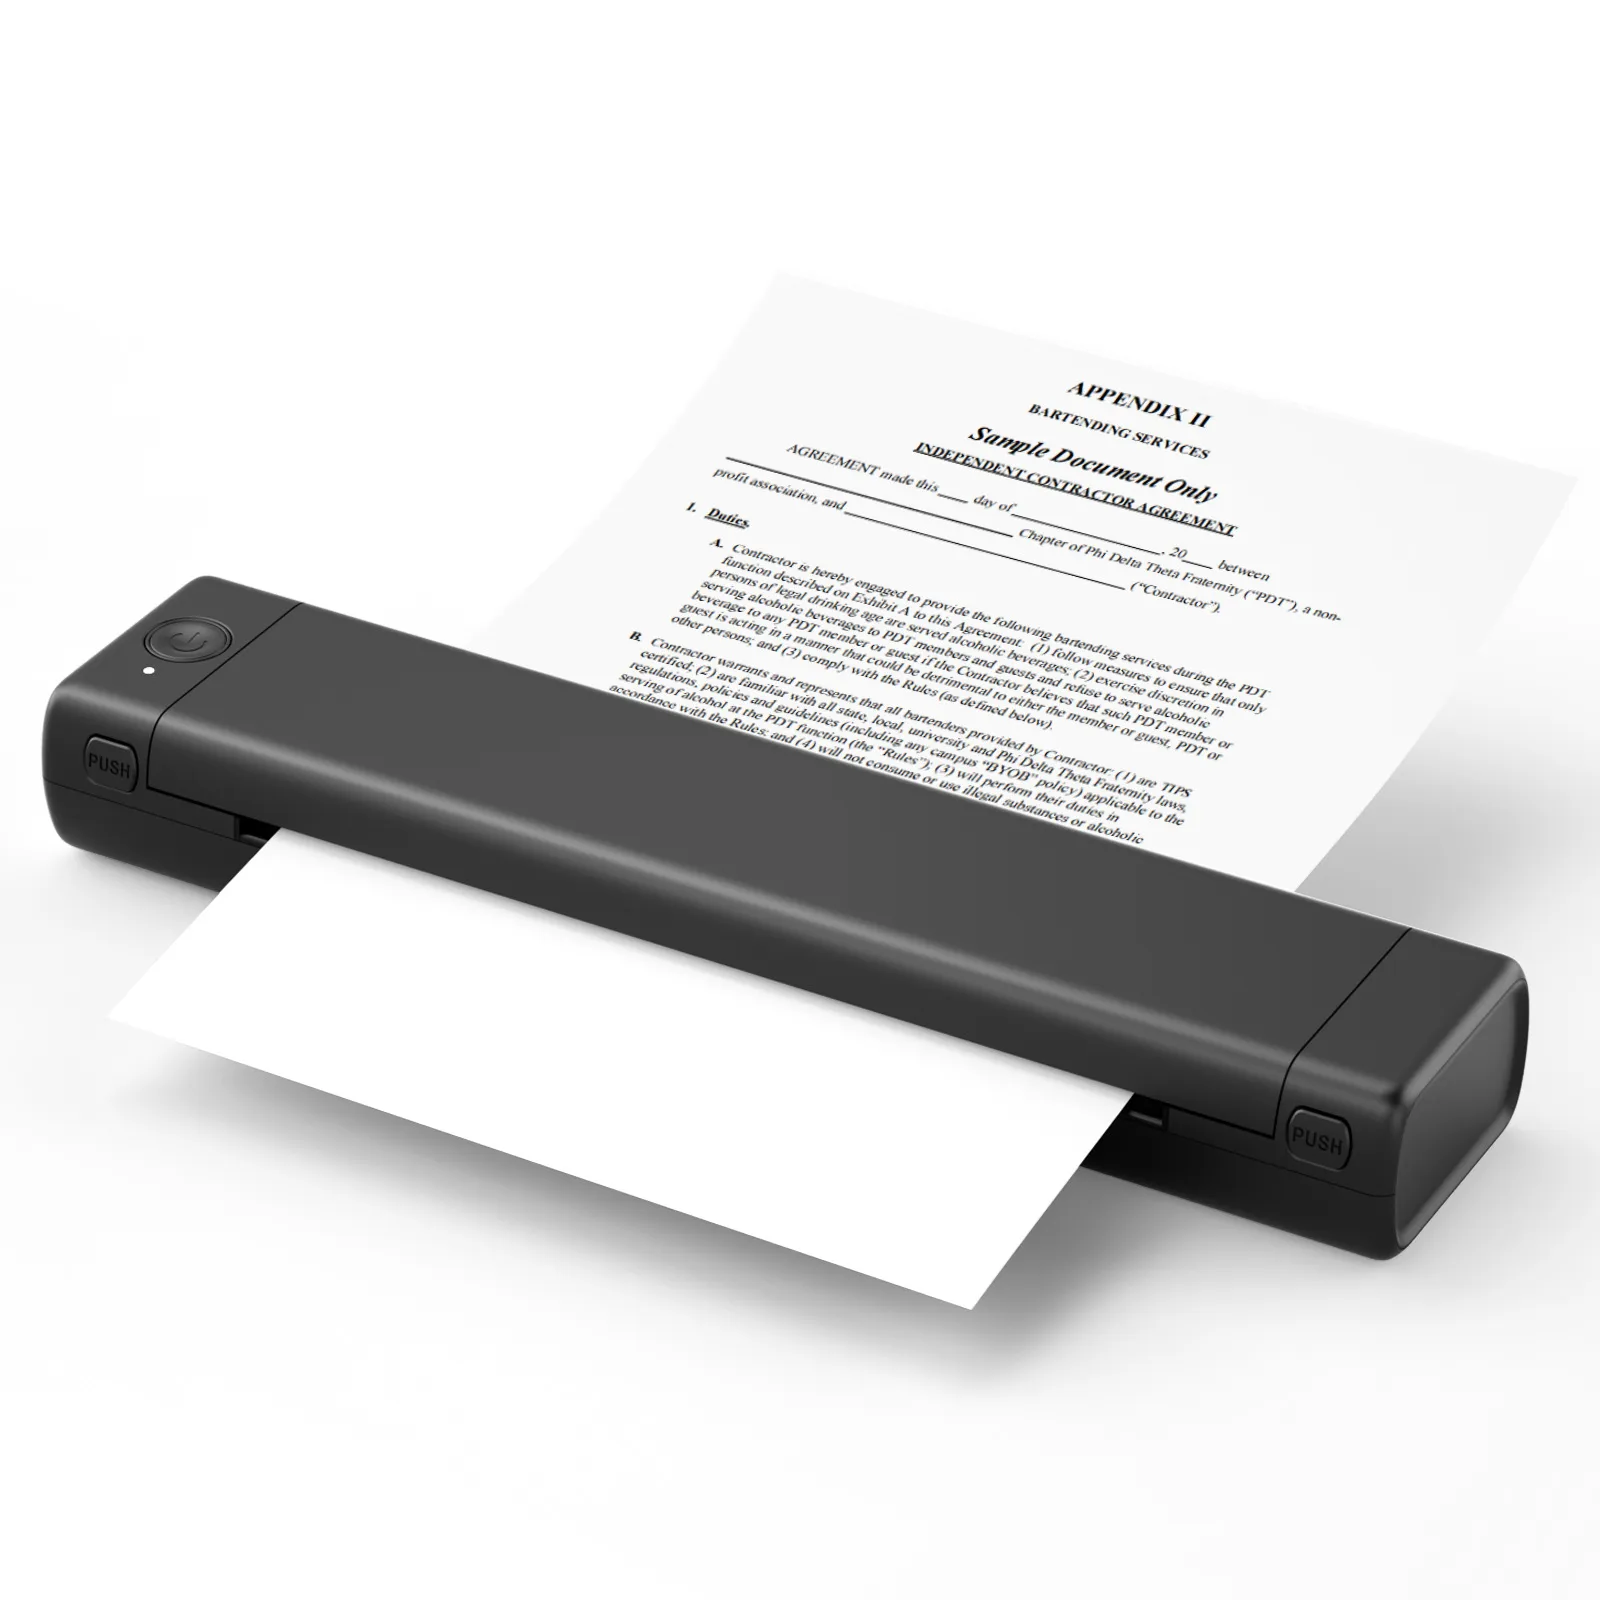 Phomemo M08F A4 Portable Thermal Portable Printer For Phone Wireless, Mobile,  And Travel Friendly For Car And Office Use, Supports 8.26X11.69 Thermal  Paper From Cjm_factory, $109.81